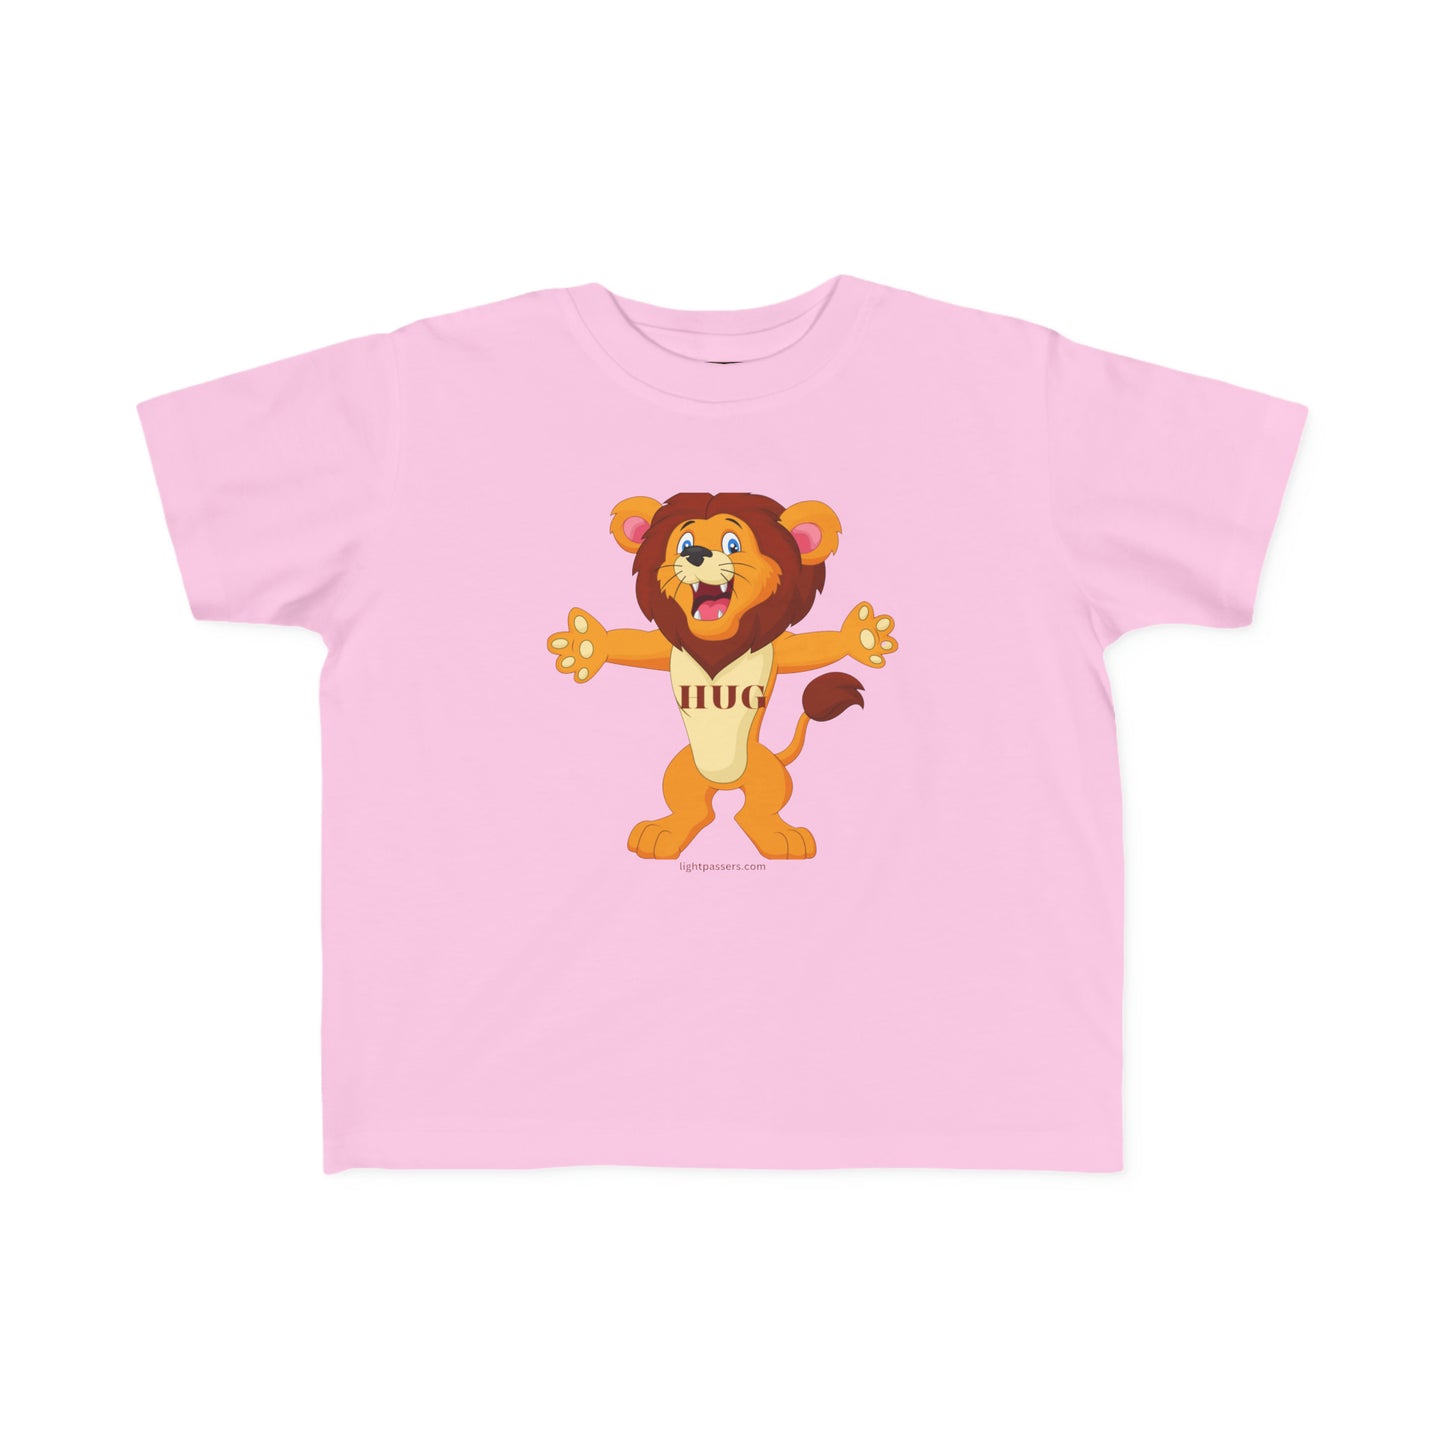 Light Passers Marketplace Give me a Hug Toddler soft T-shirt Simple Messages, Mental Health